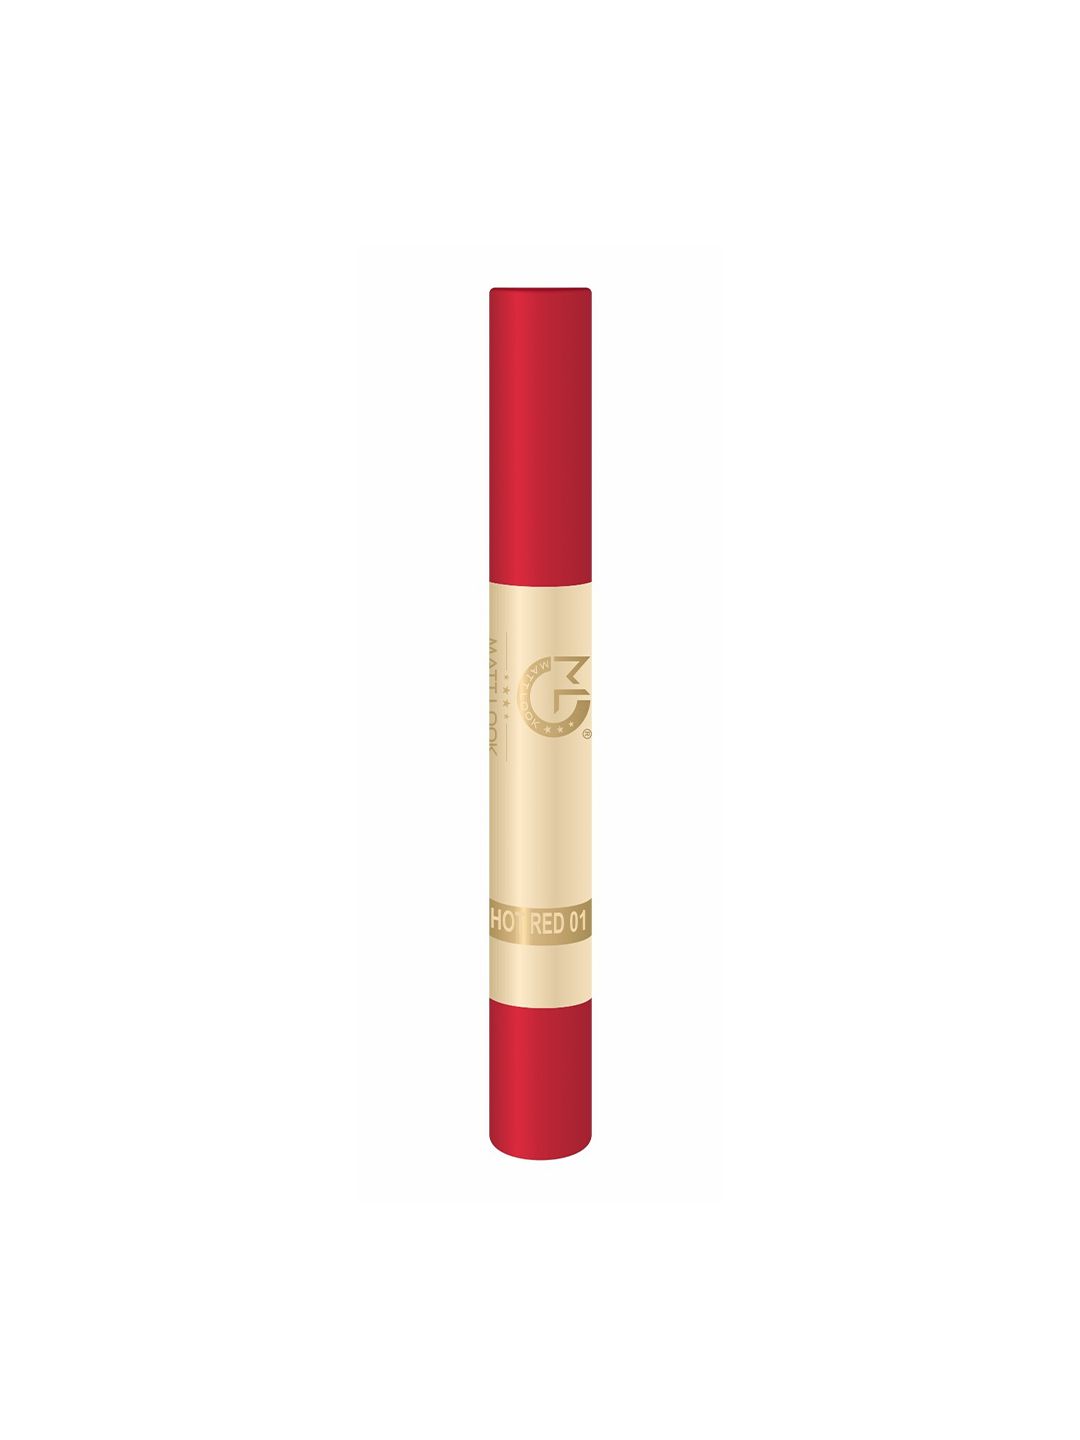 MATTLOOK Women Red Smooth Non-Transfer Lipstick LS1501 - Hot Red 20g Price in India